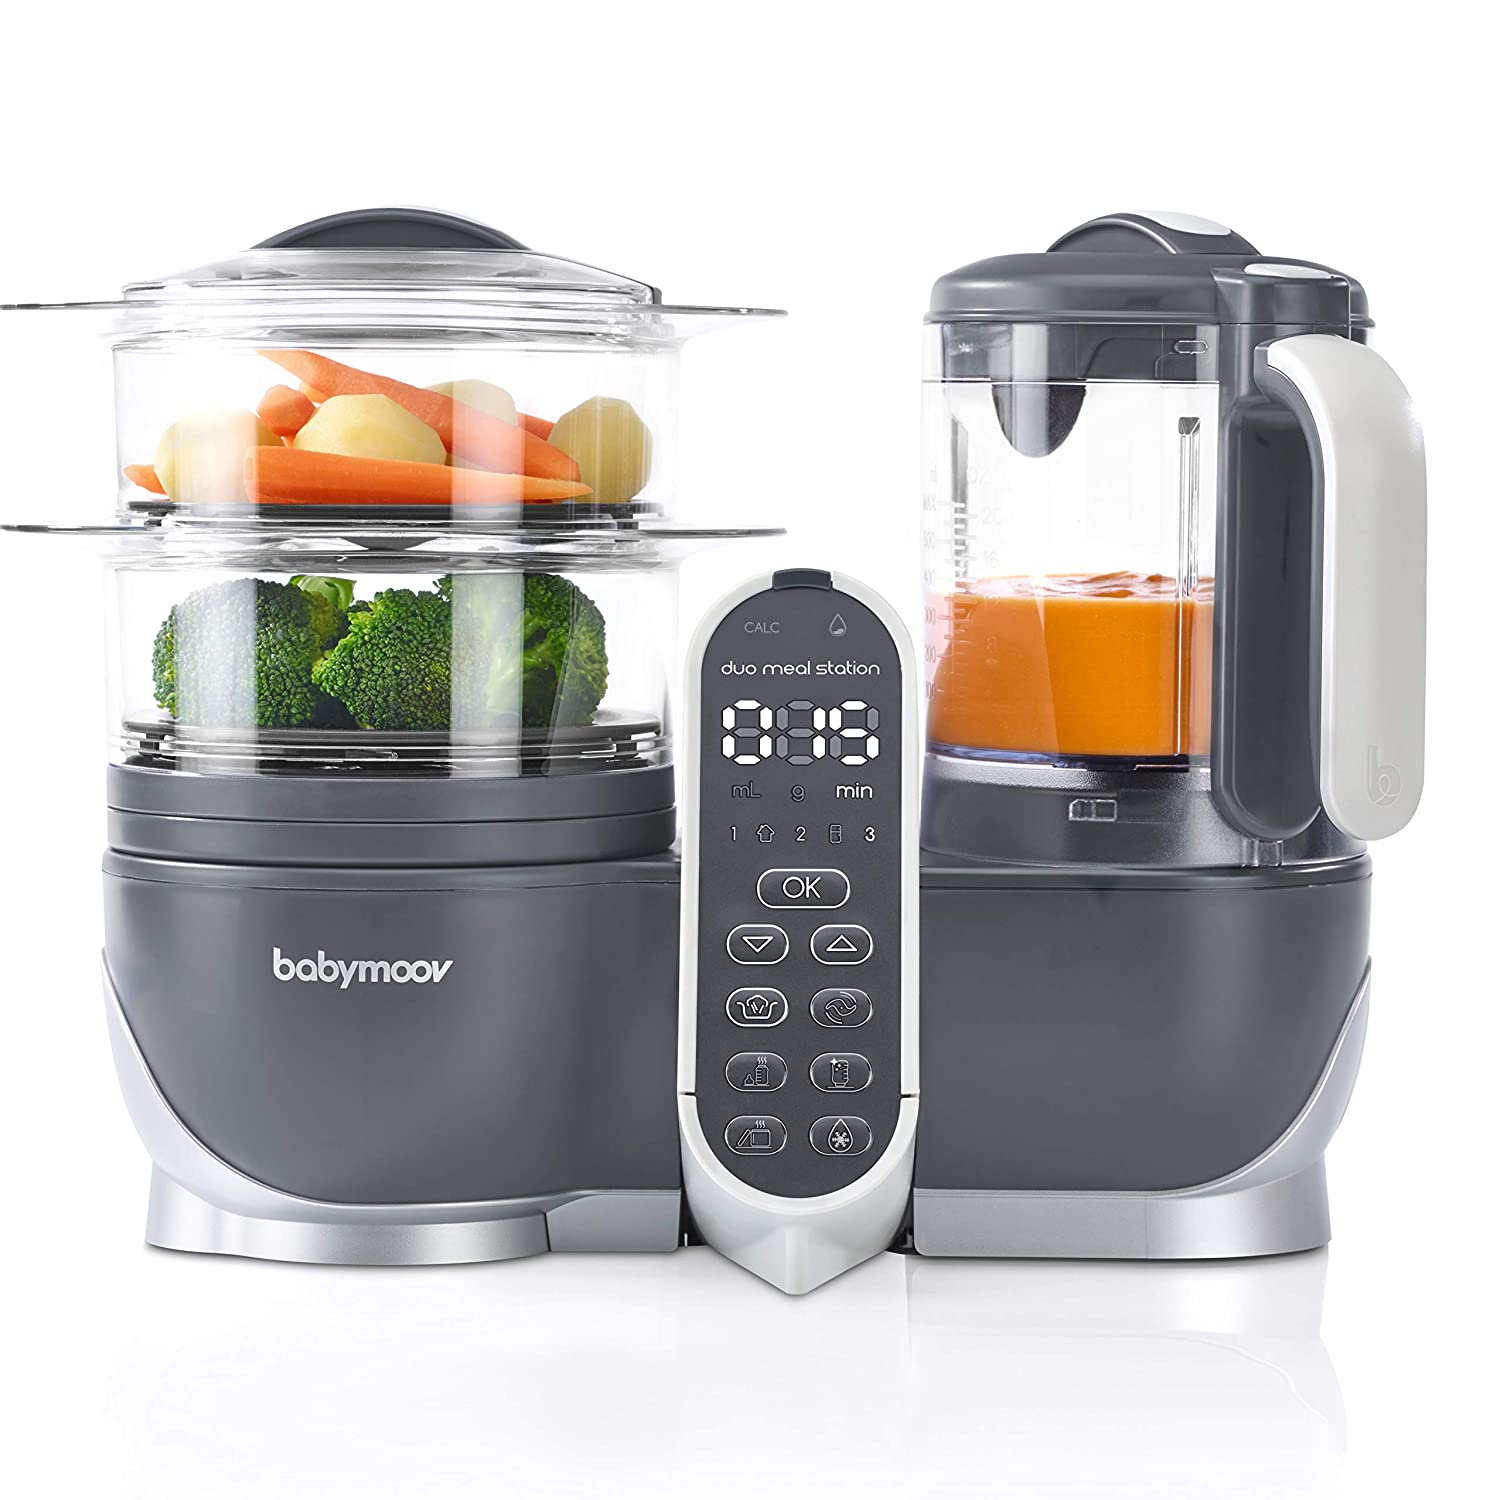 Duo Meal Station Food Maker | 6 in 1 Food Processor with Steam Cooker